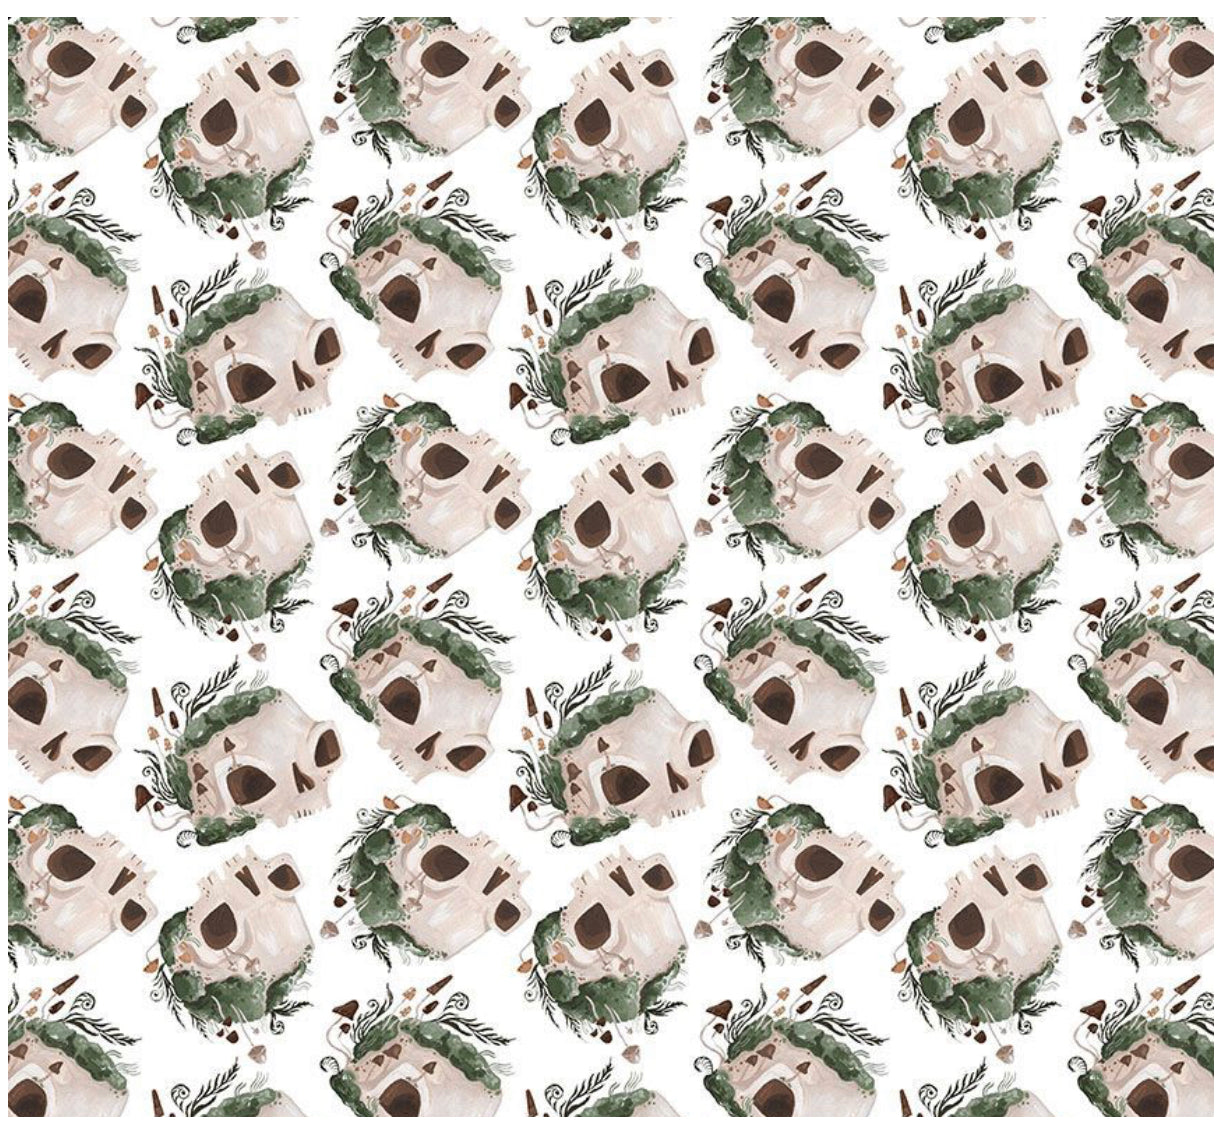 MOSSY SKULLS by Rae Ritchie for Dear Stella, 100% Cotton, Toad Hollow Fabrics